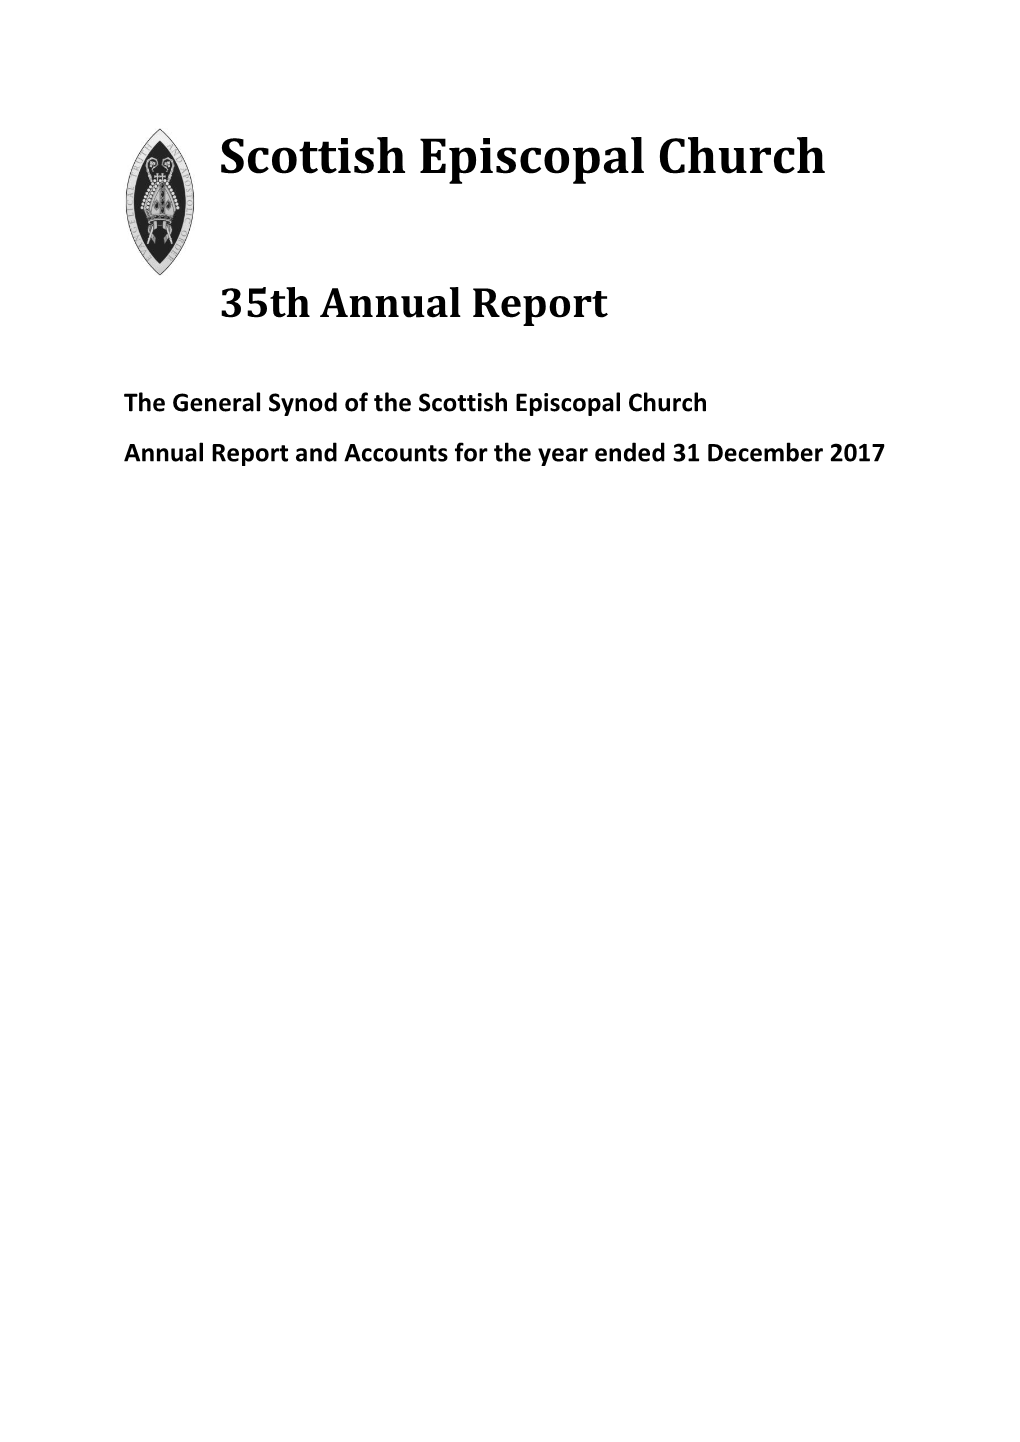 35Th Annual Report and Accounts for the Year Ended 31 December 2017